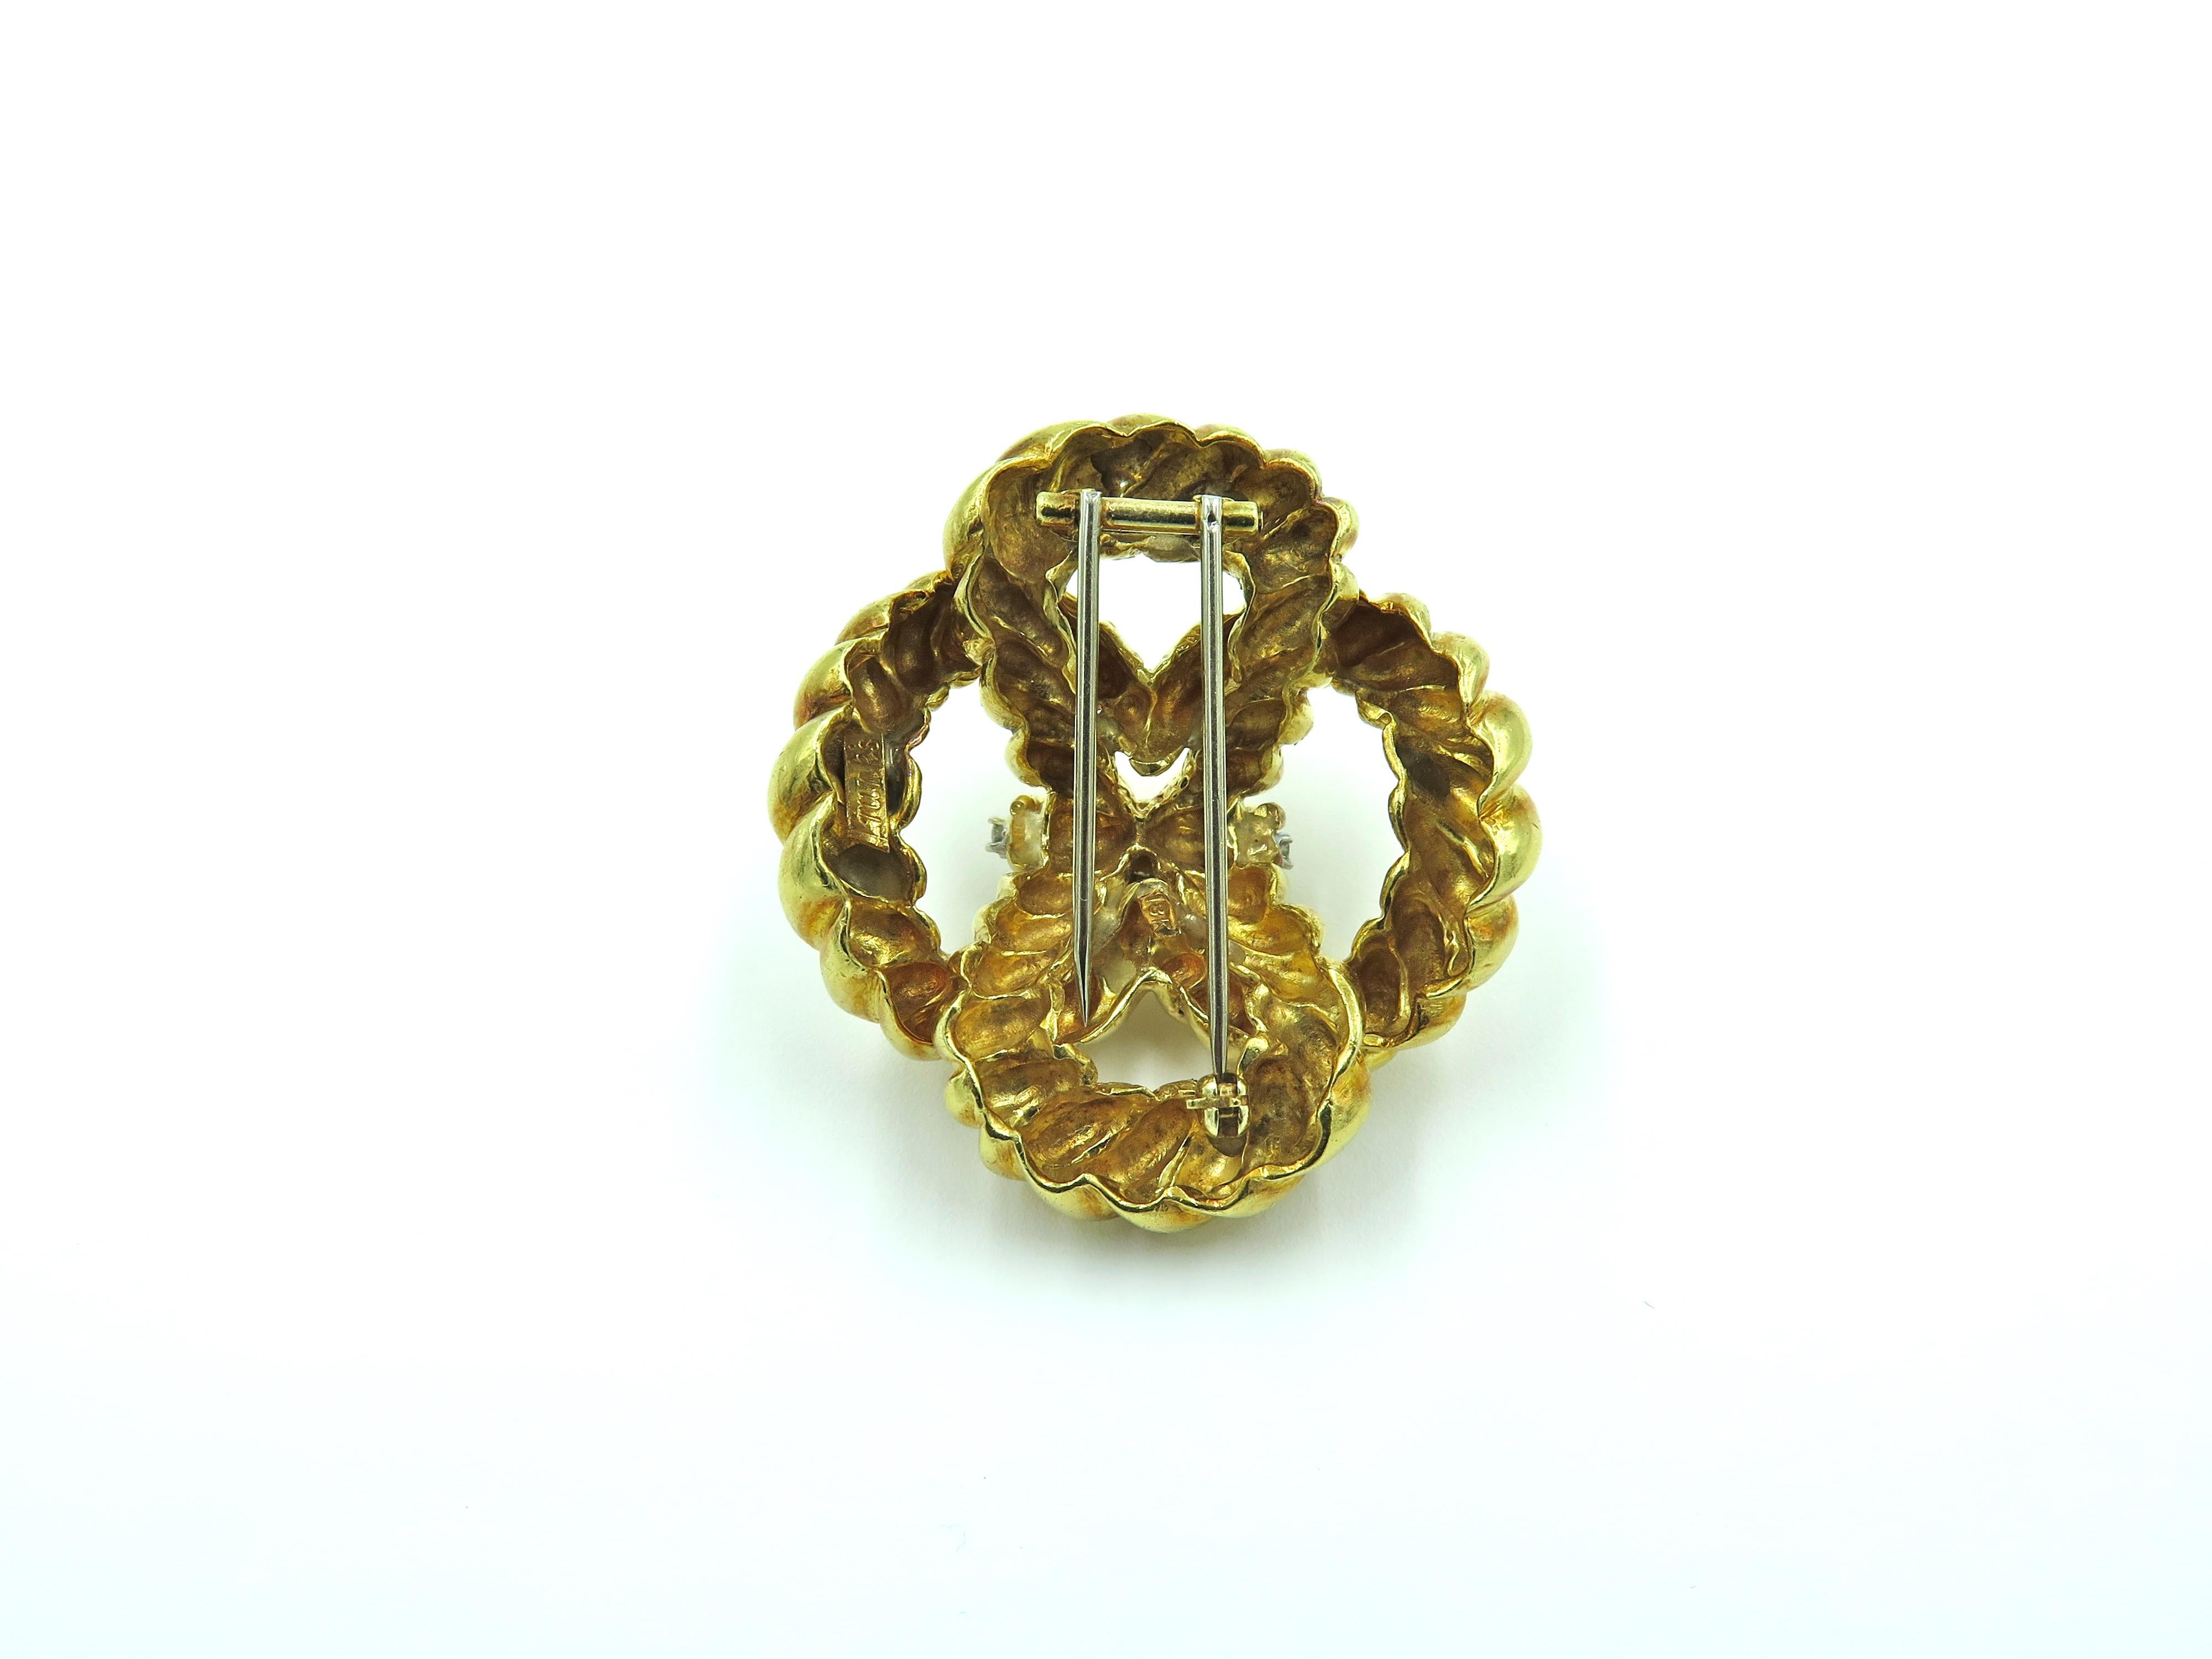 An 18 karat yellow gold and diamond brooch. Circa 1960. Designed as a polished ropework knot, enhanced by a line of circular cut diamonds. Seven (7) diamonds weigh approximately 0.30 carat. Length is approximately 1 3/4 inches, gross weight is